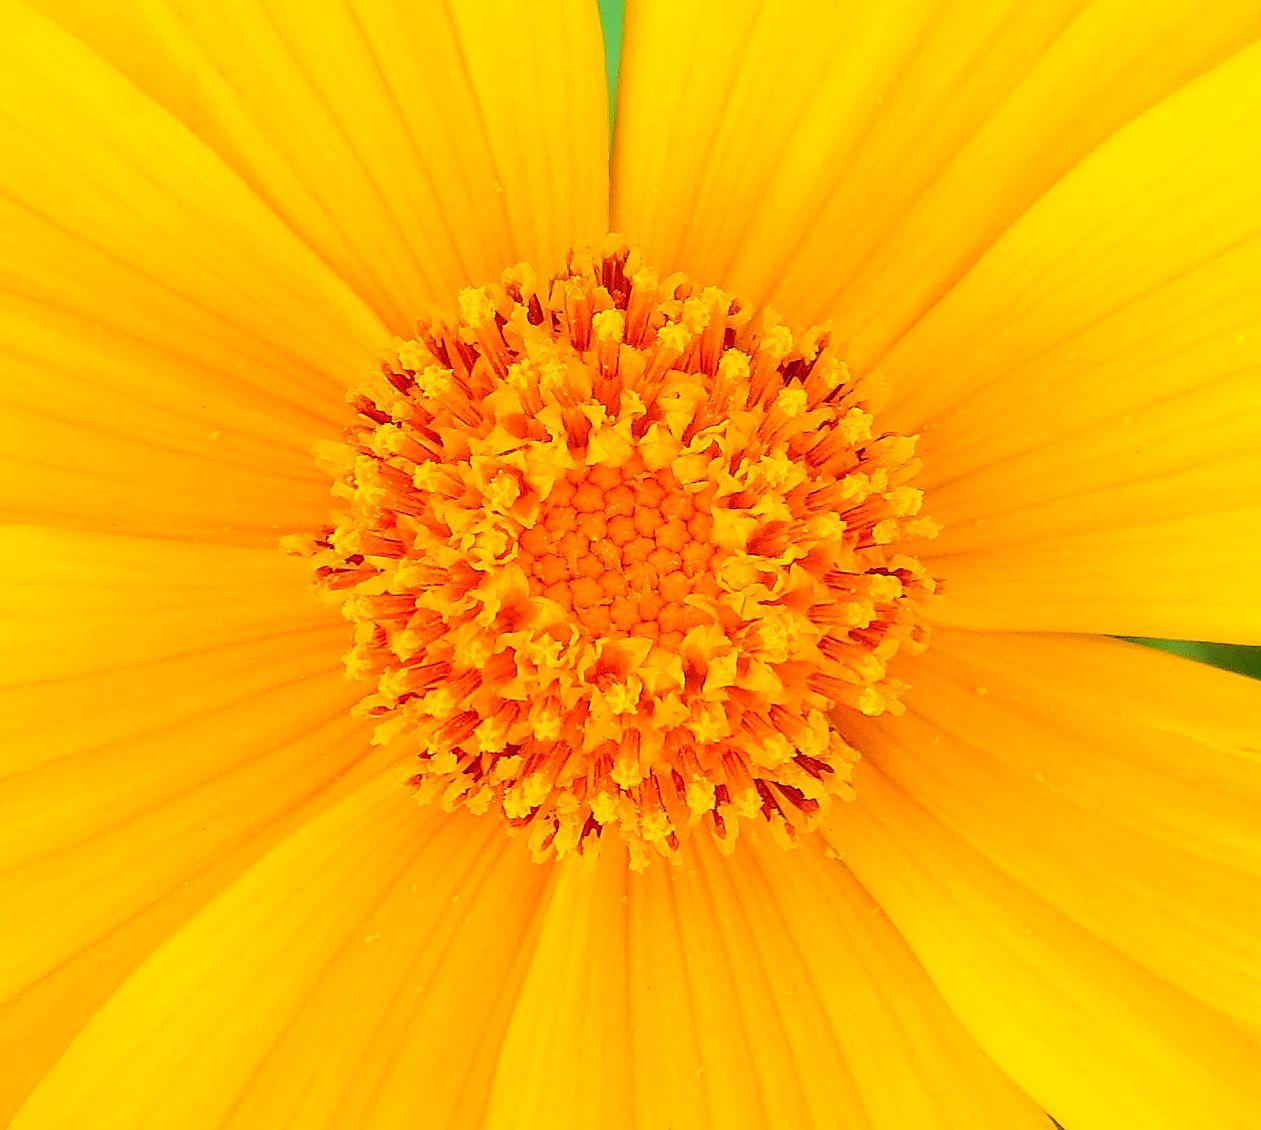 Orange and Yellow Flower Logo - Free Stock Photo 12059 yellow flower close up | freeimageslive